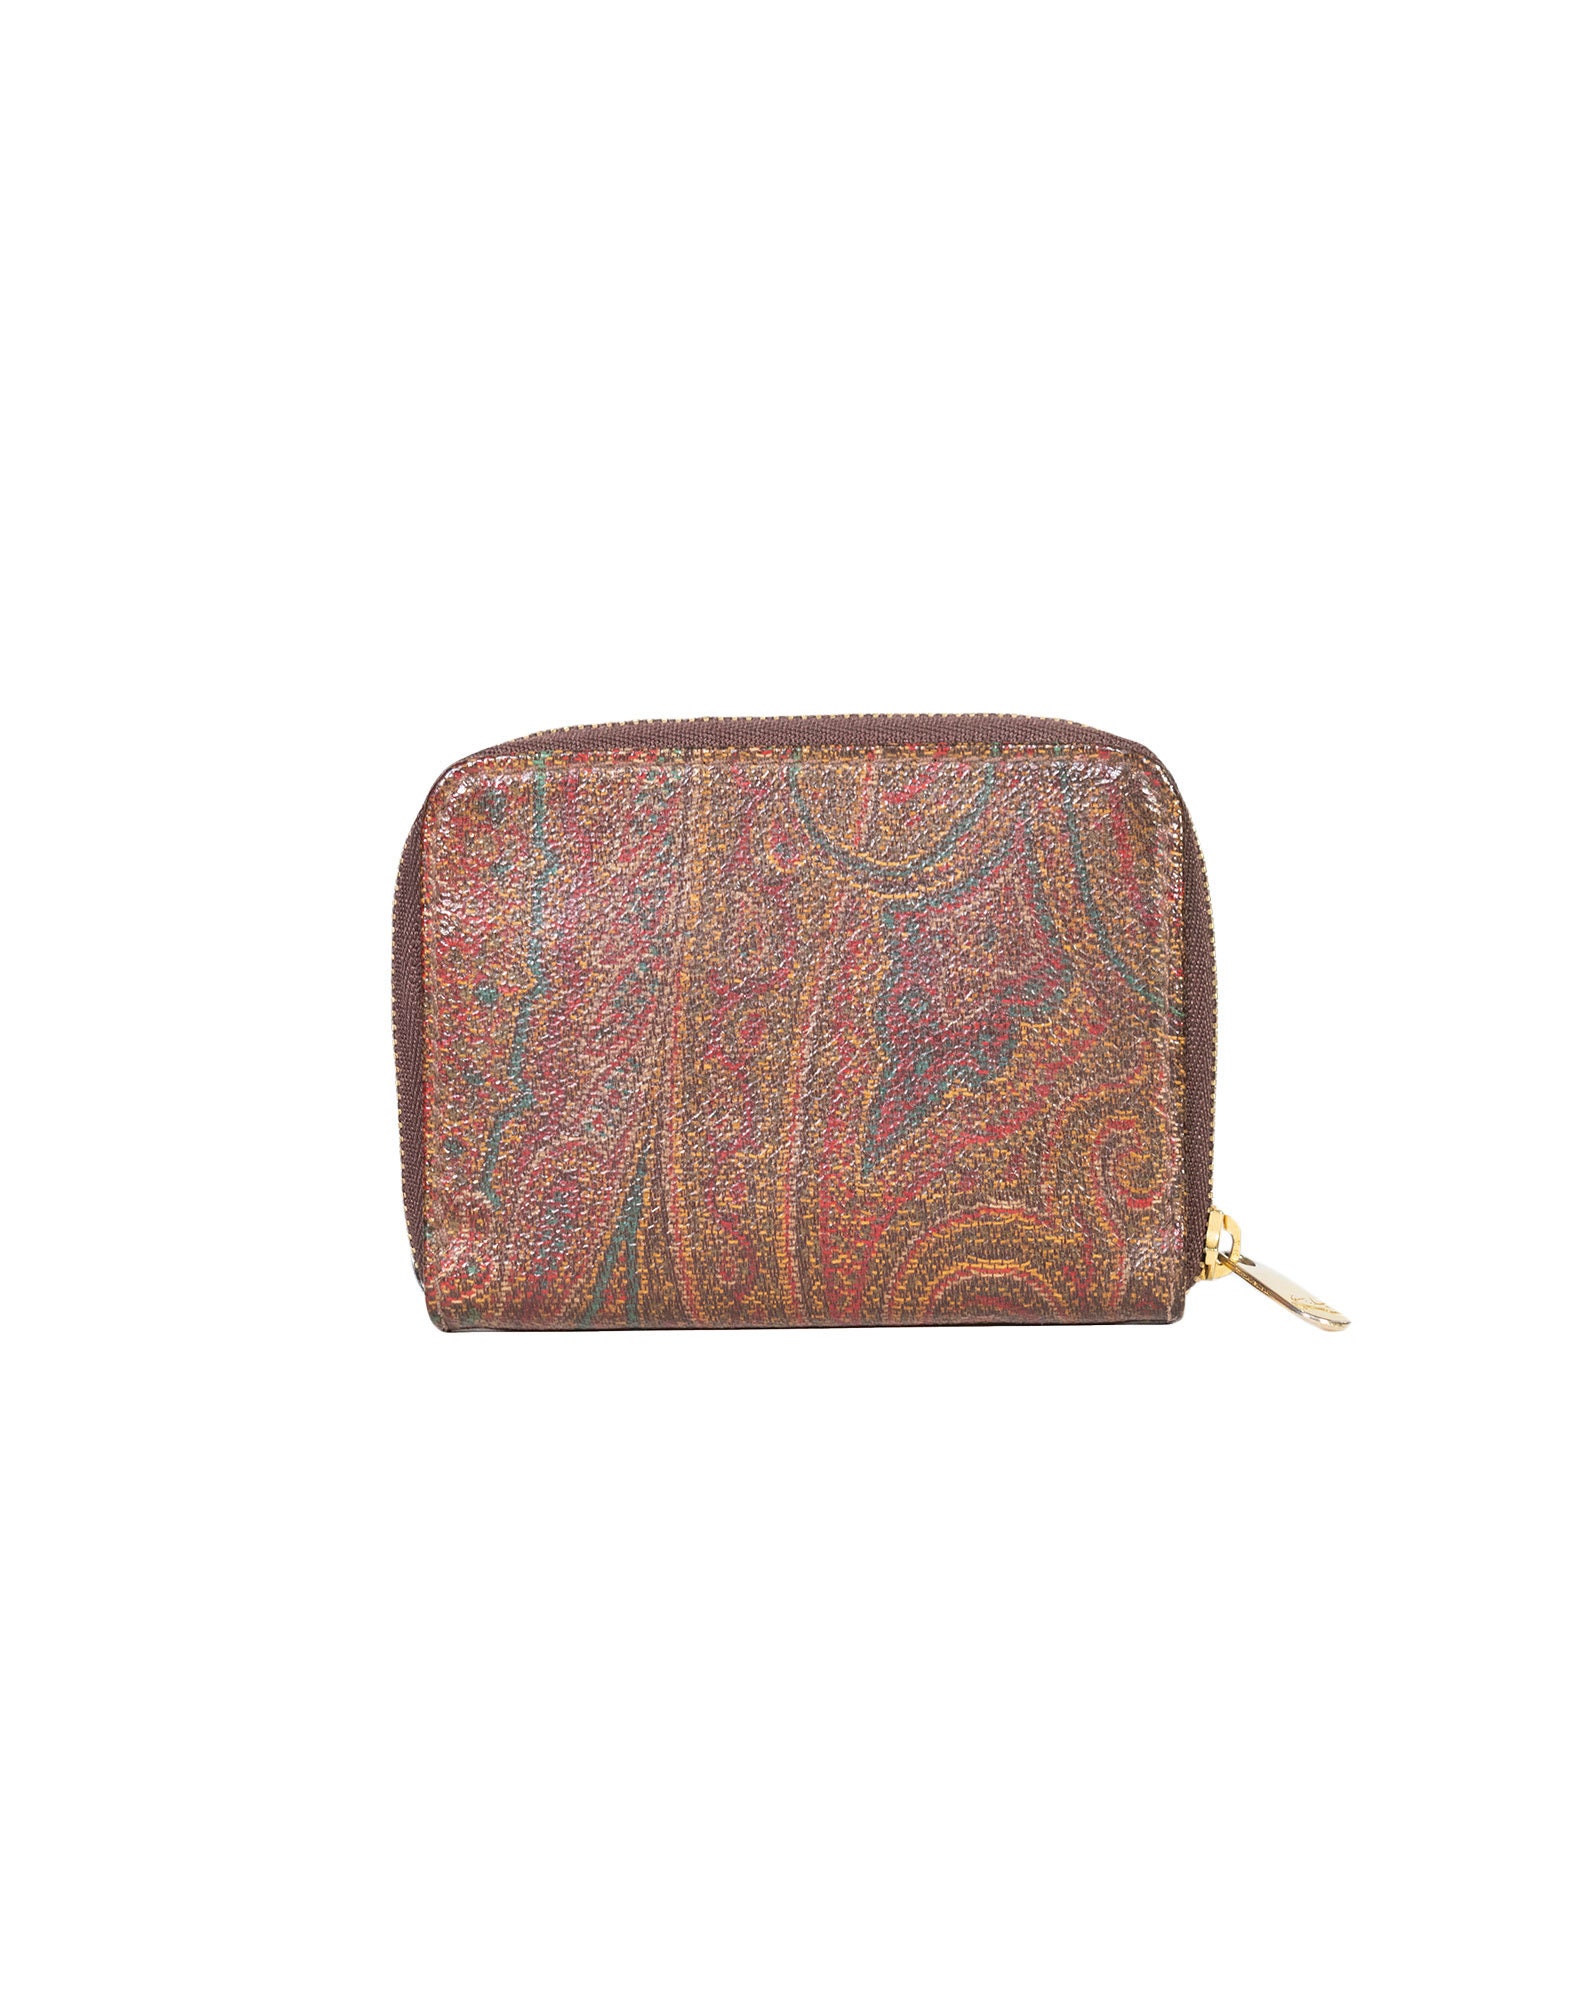 BRAND NEW ETRO PAISLEY BUCKET BAG WITH SHOULDER STRAP 0N039